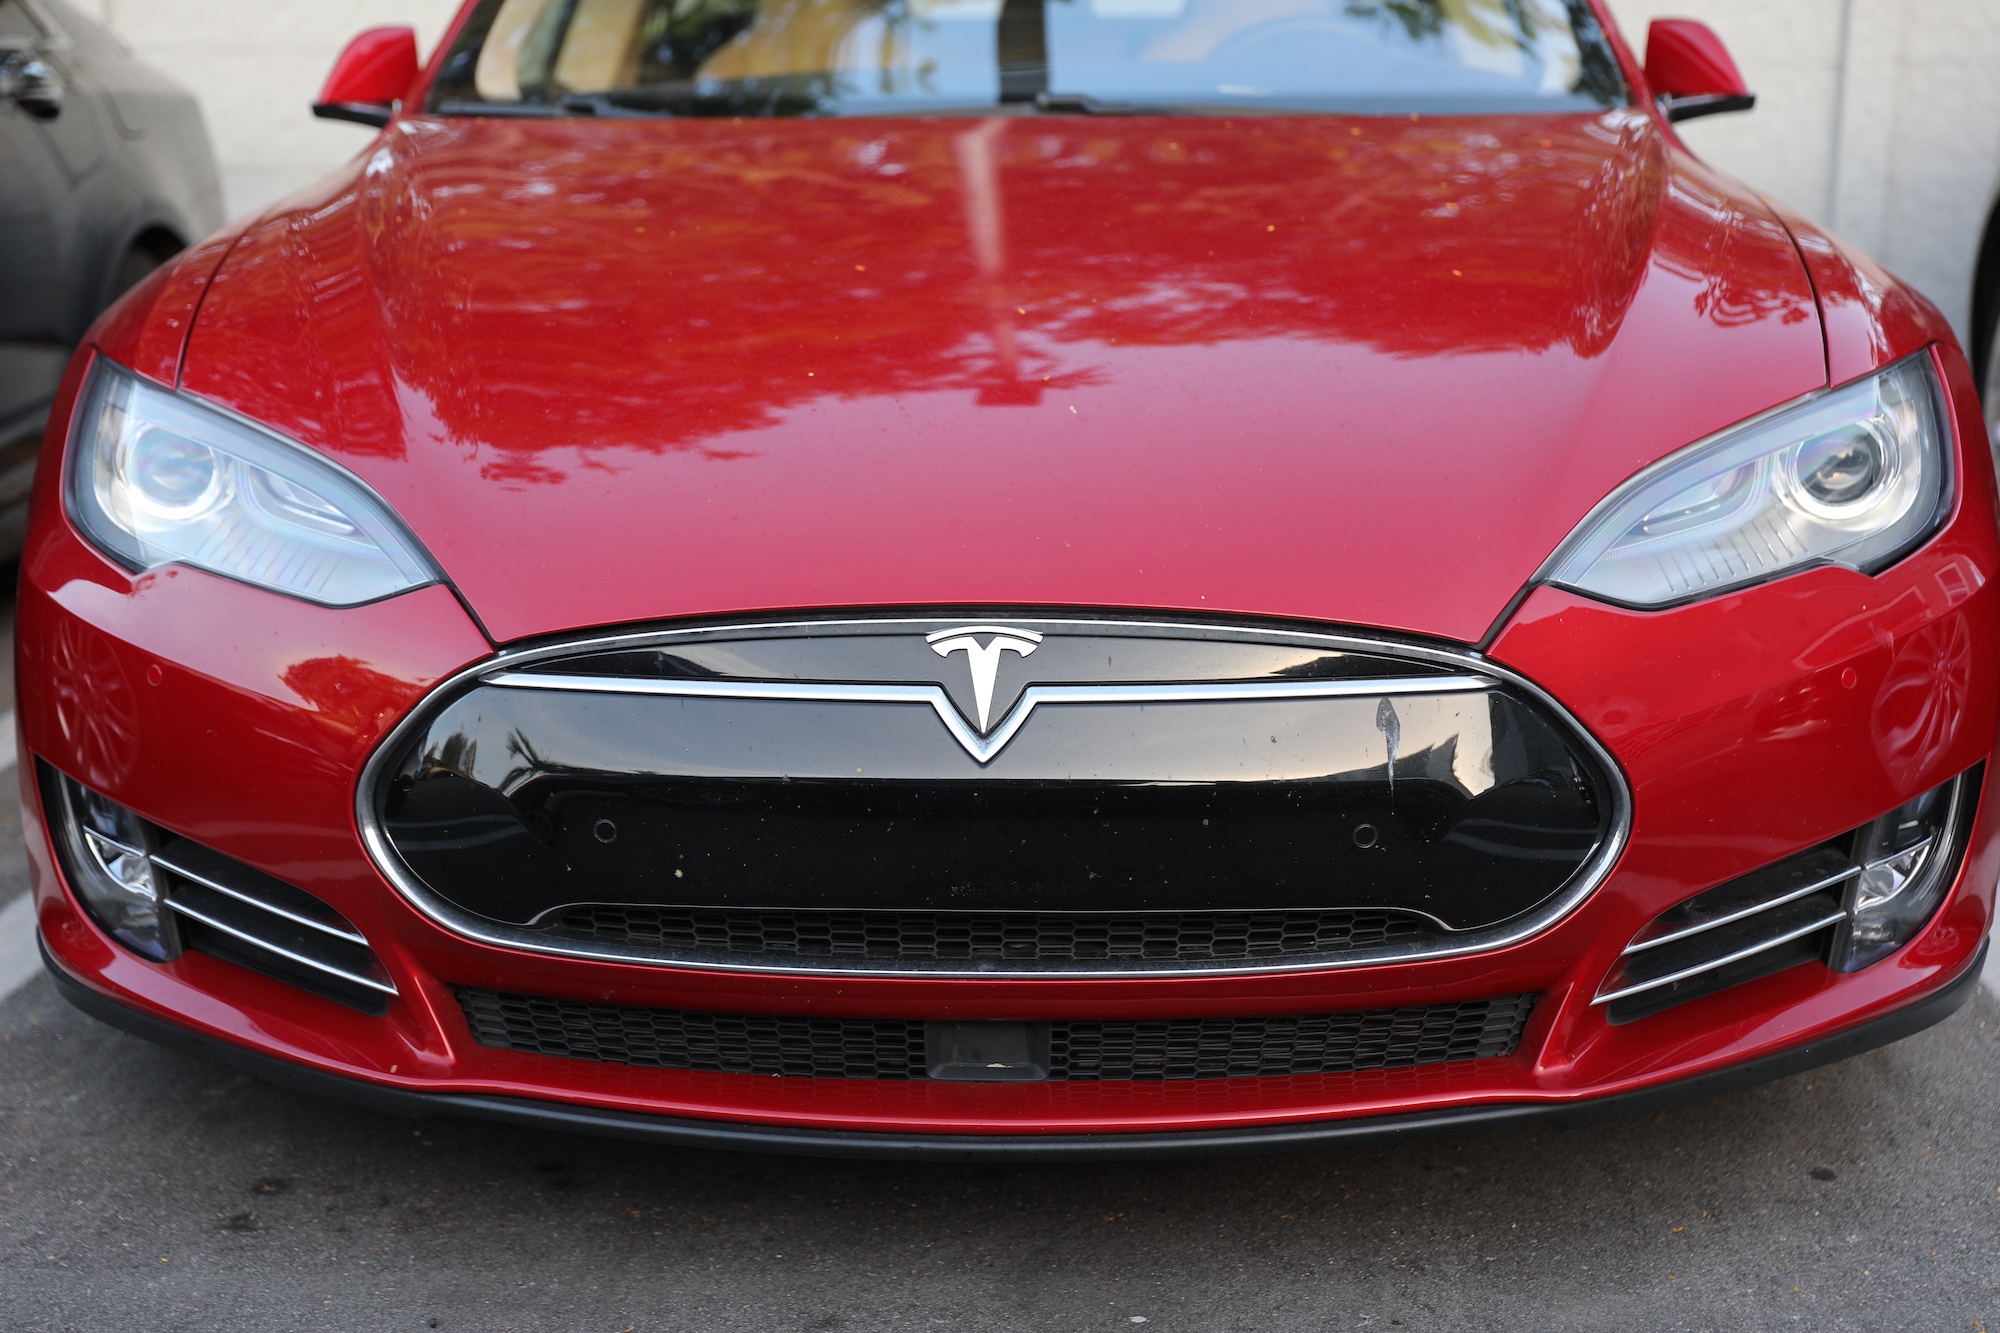 A red Tesla vehicle parked at a dealership in Miami, Florida, on January 3, 2019